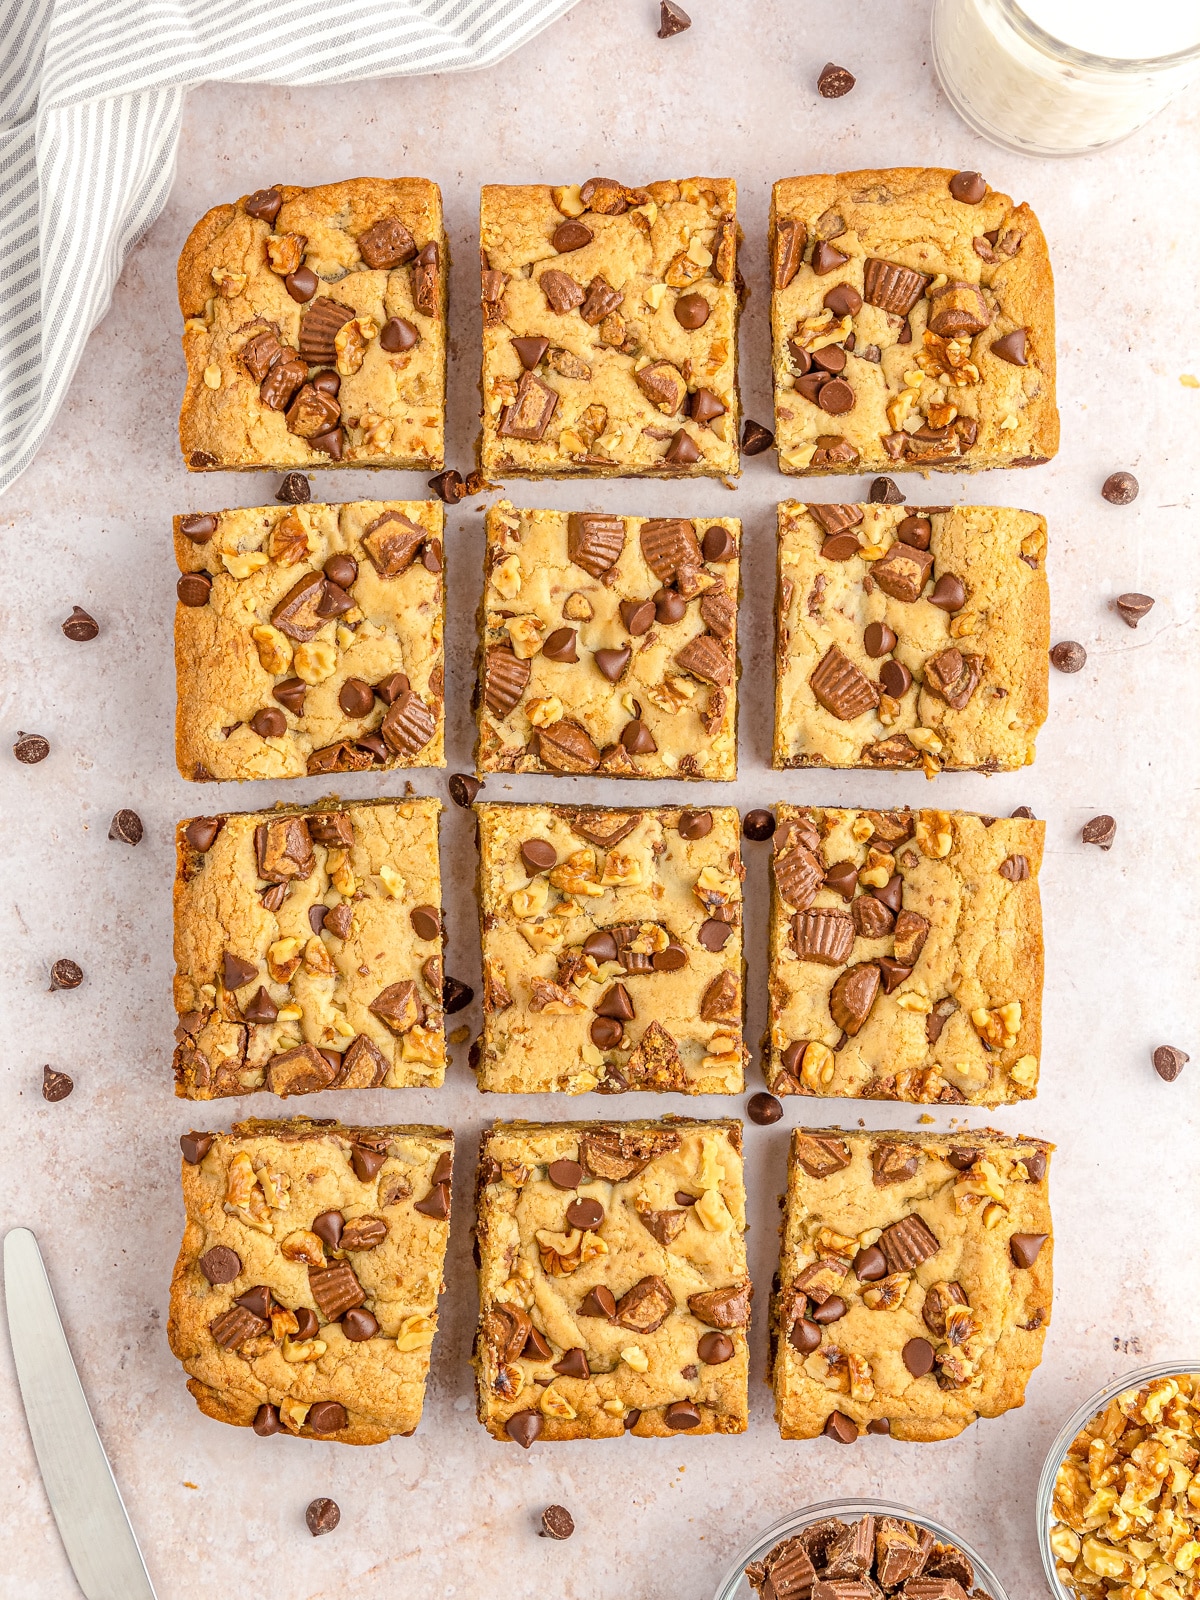 Nine golden-brown blondie bars topped with nuts and chocolate chunks, arranged in a grid on a light surface.